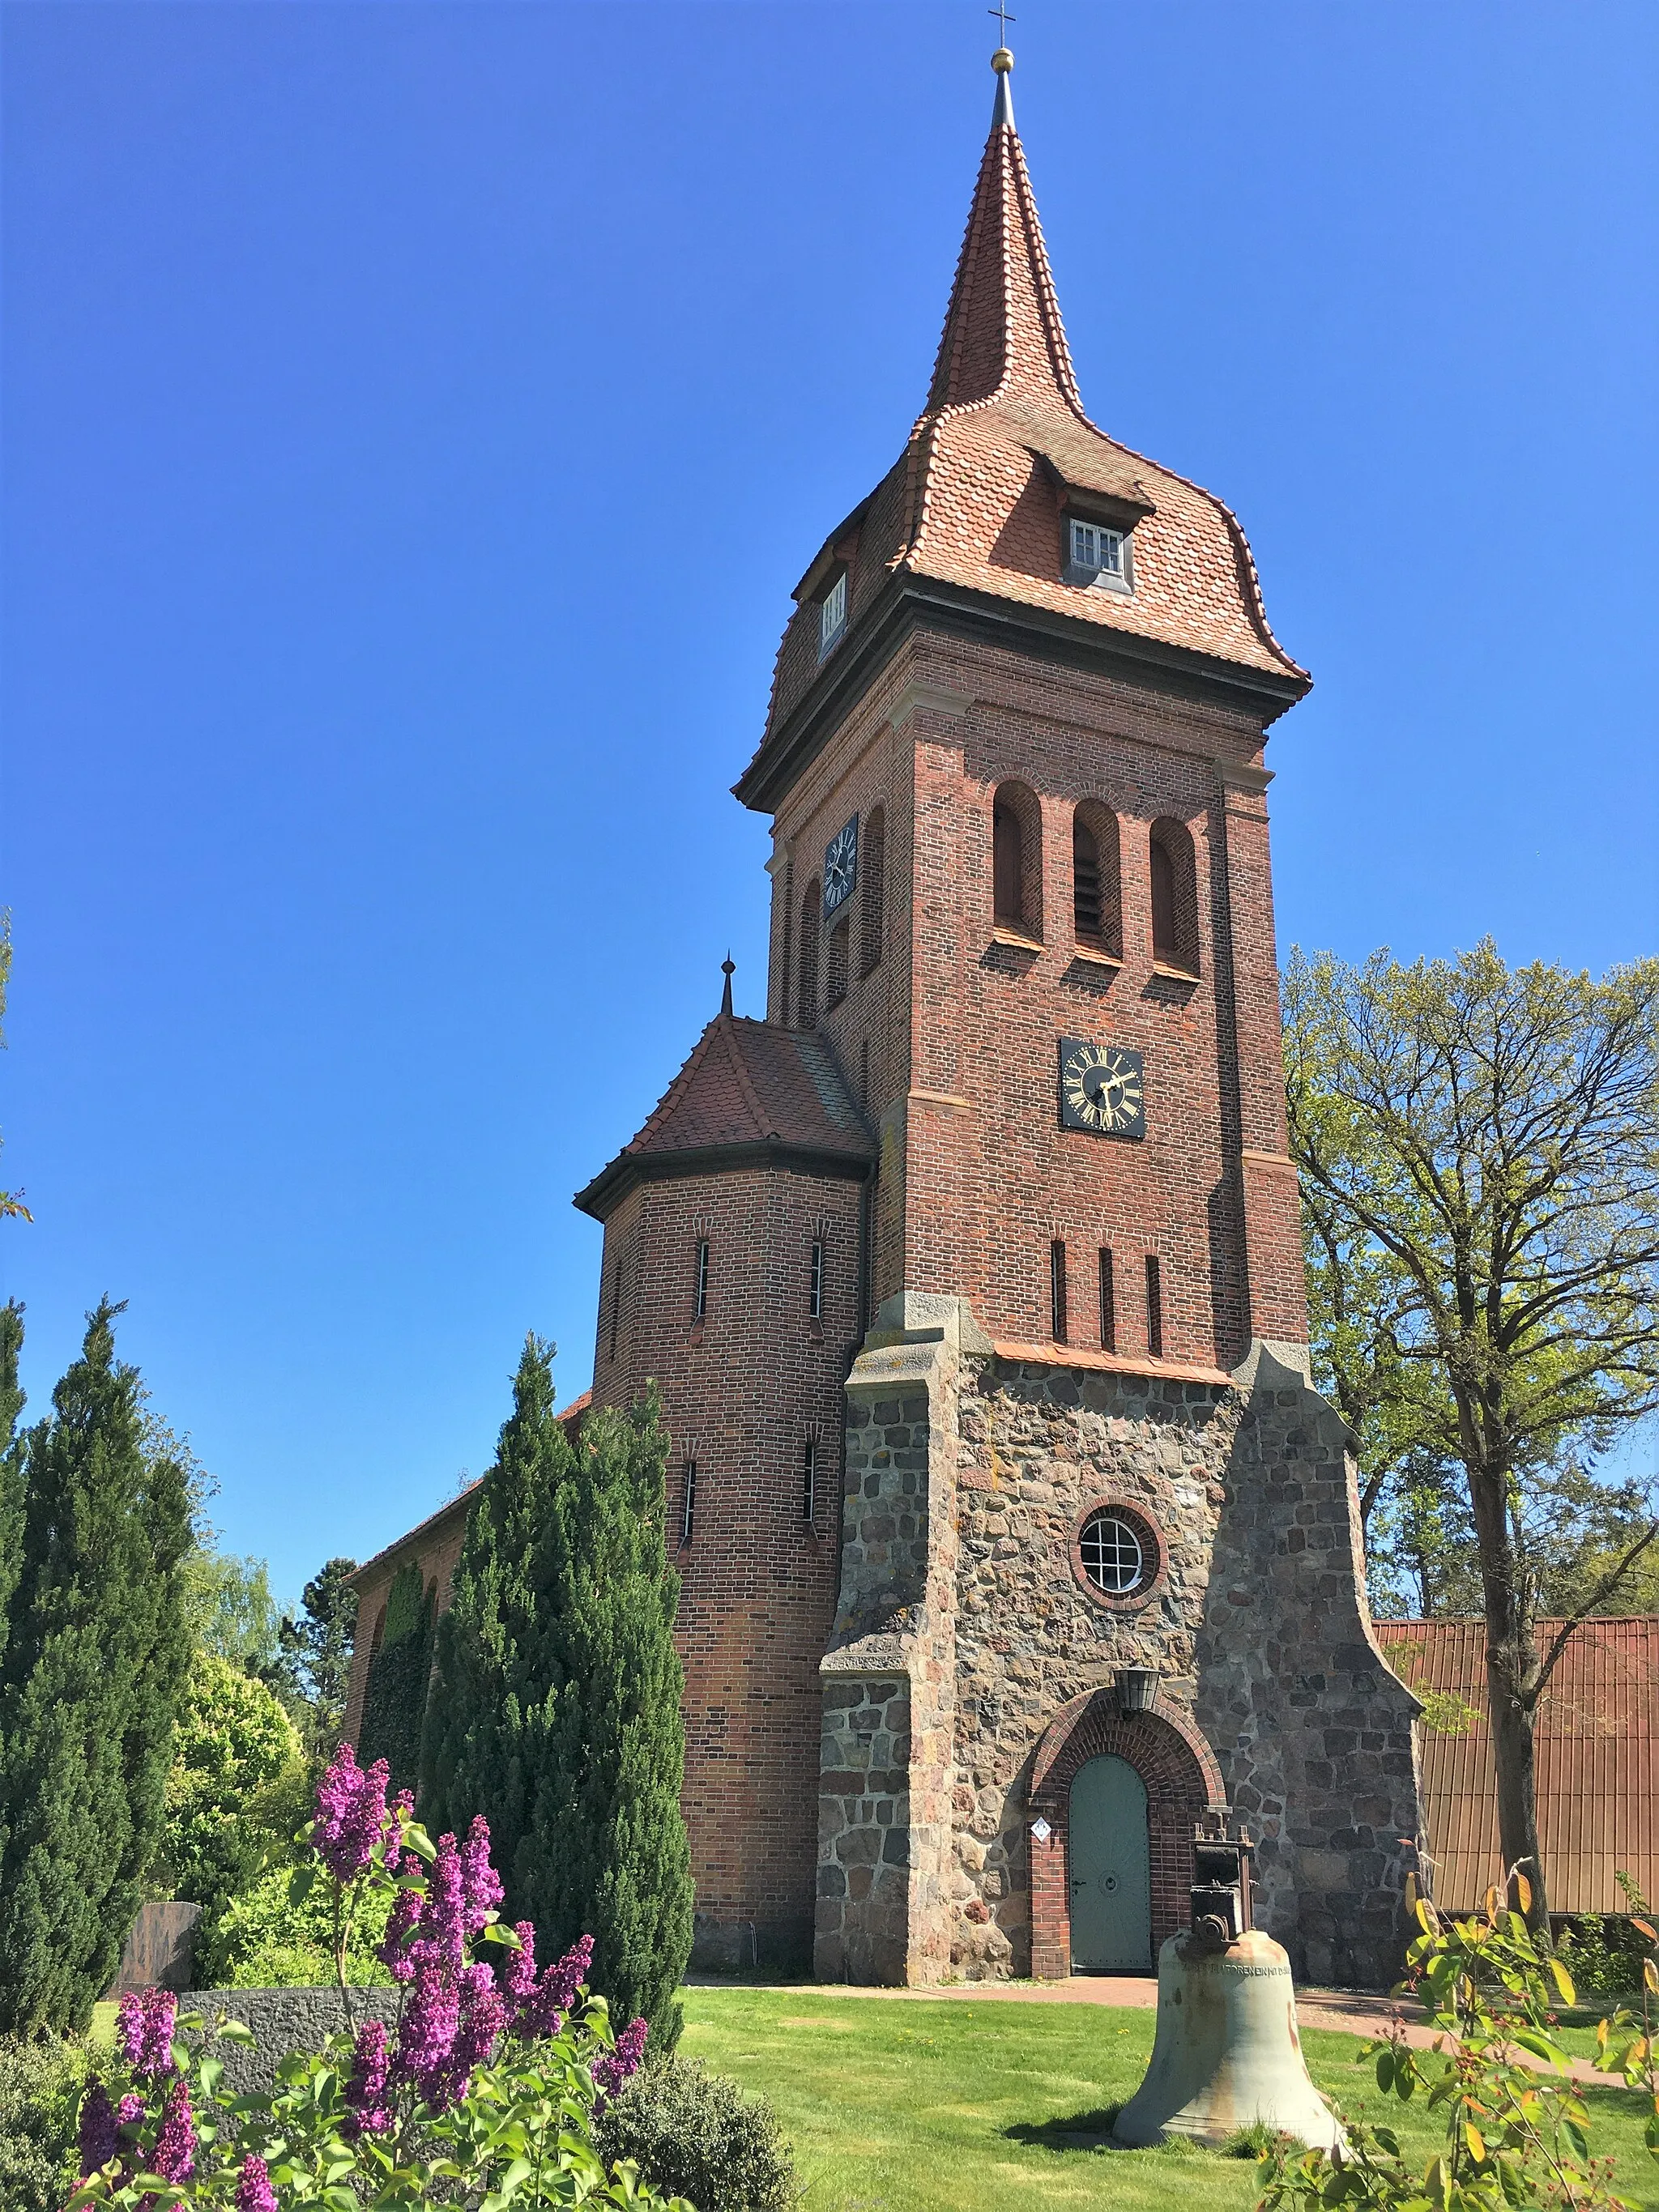 Photo showing: The church of Natendorf is a brick church with fieldstone elements in the district of Uelzen, Lower Saxony.